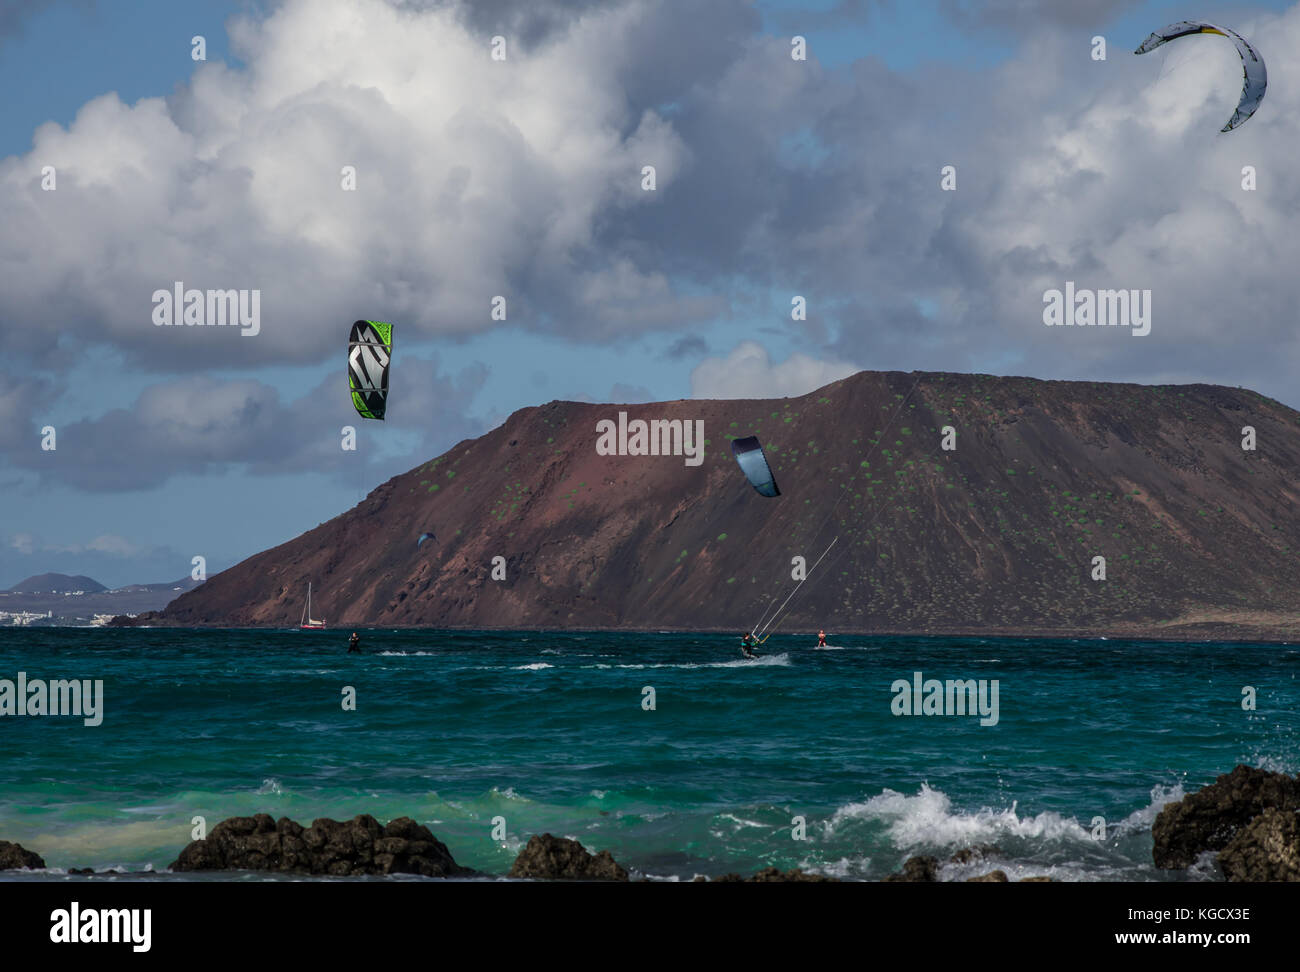 practitioners of kitesurfing in the wilderness of the Canaries, in the sea area between Fuerteventura and los lobos covered by clouds Stock Photo